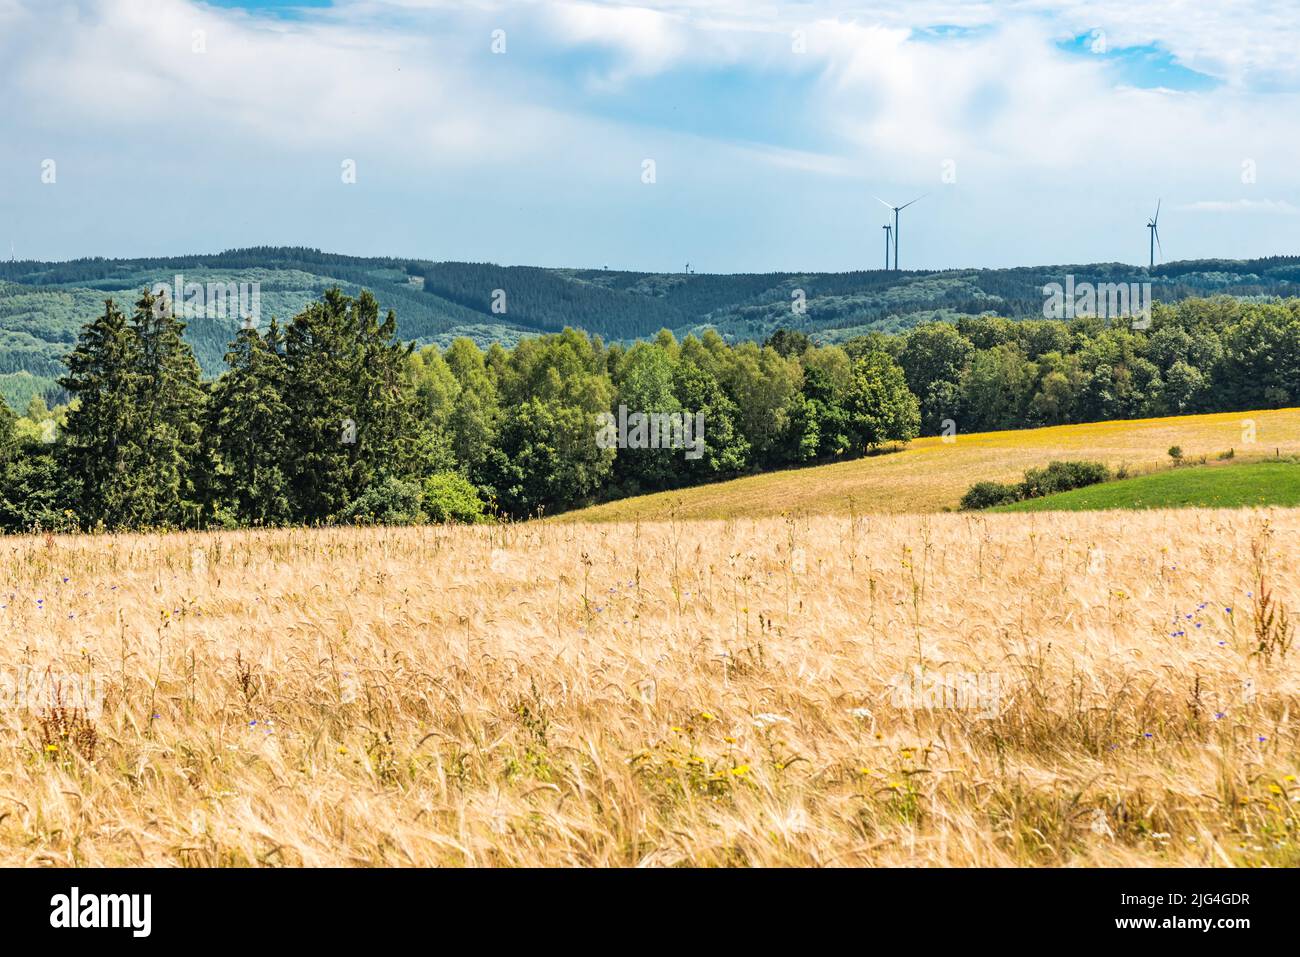 Panoramic view over the agriculture fields and meadows of the East-Belgian countryside near Burg-Reuland, Belgium Stock Photo